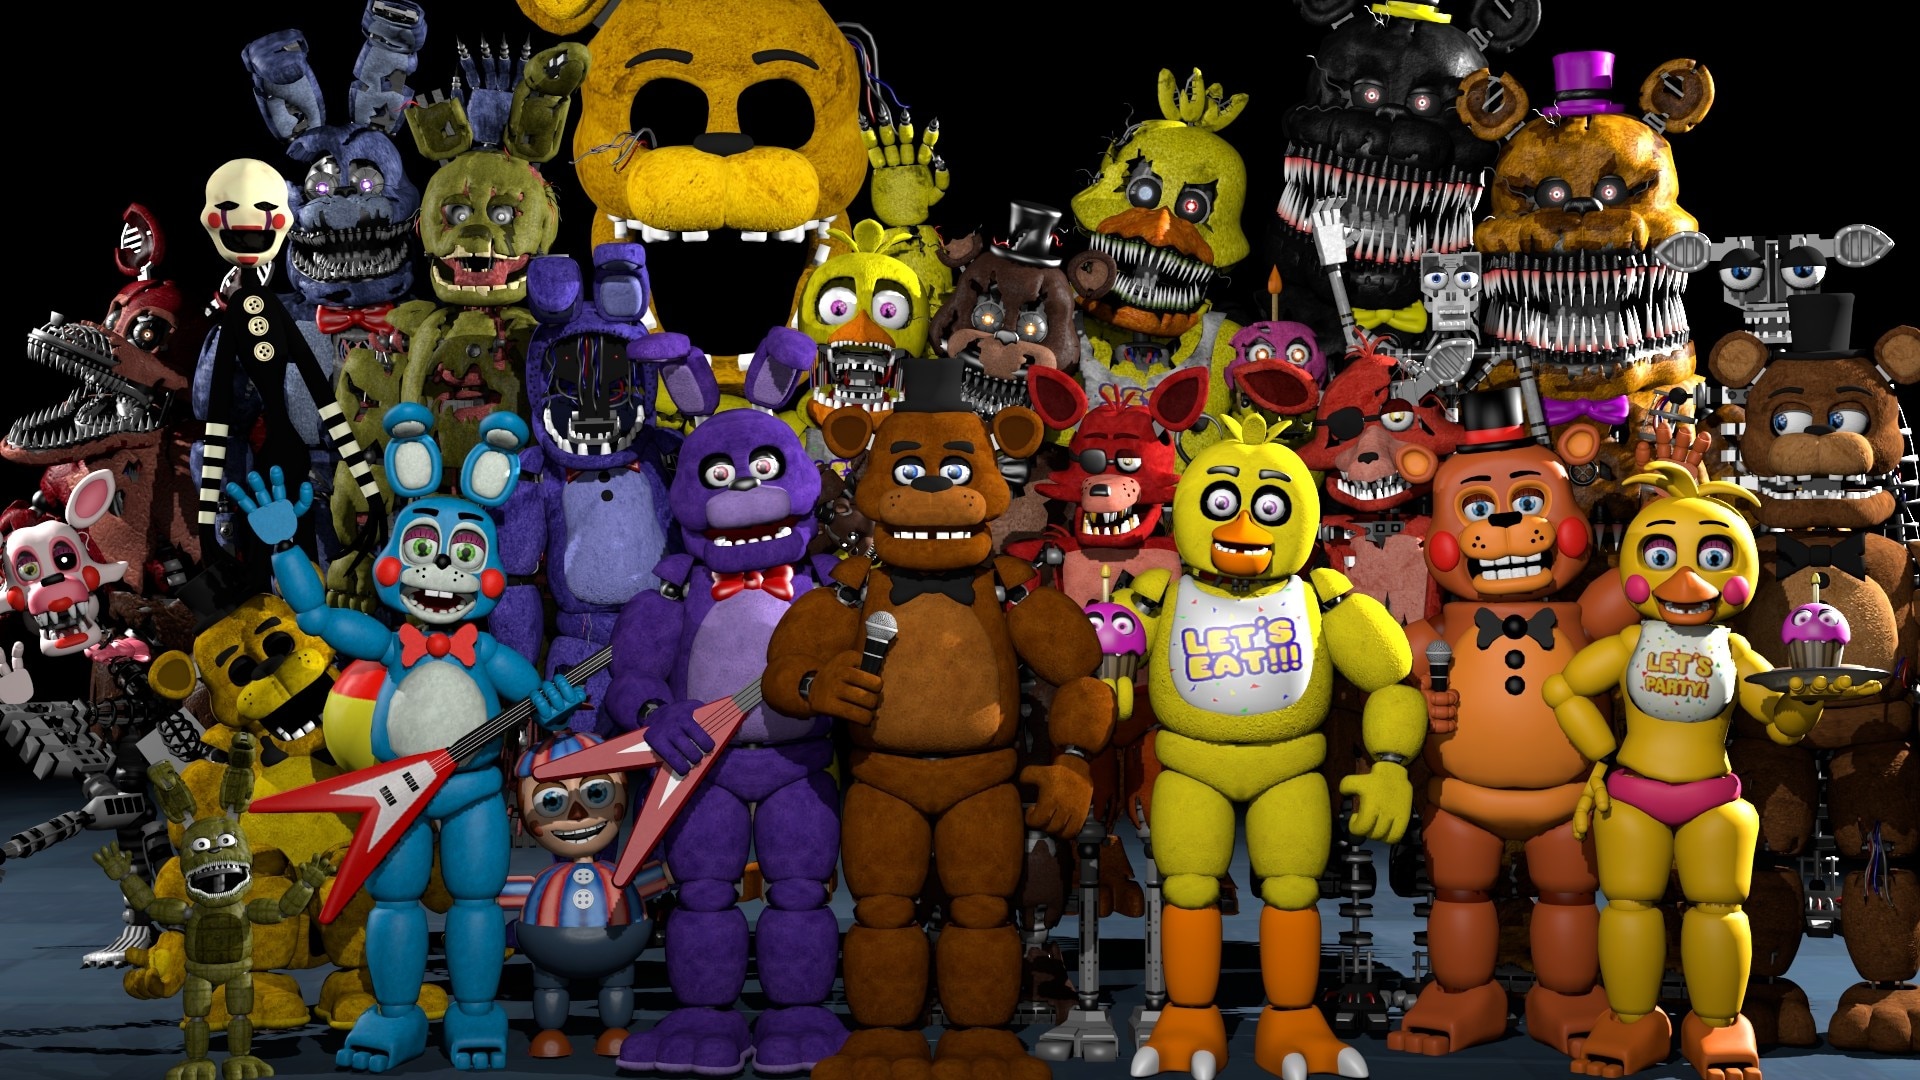 FNAF 1 in Garry's mod is so underrated : r/fivenightsatfreddys